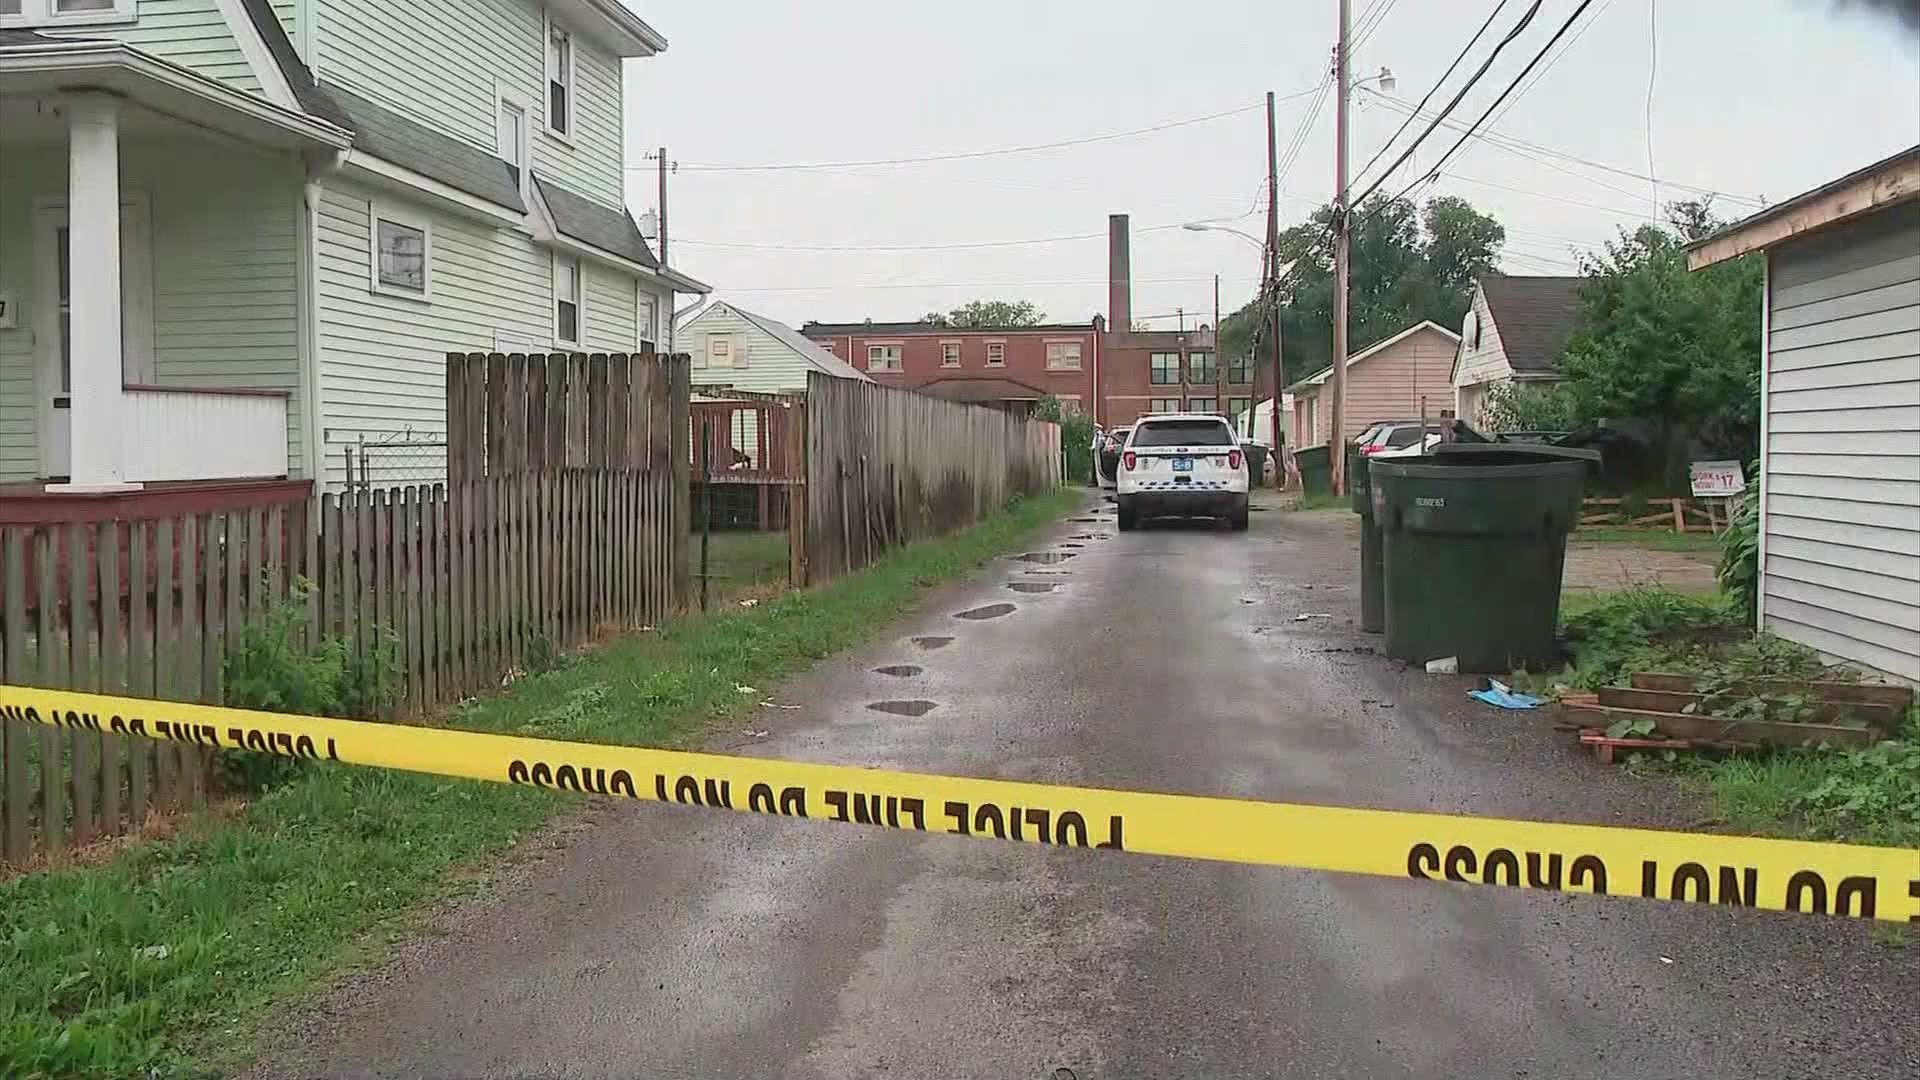 The woman was found in an alley in the 500 block of South Terrace Avenue around 6:20 a.m.